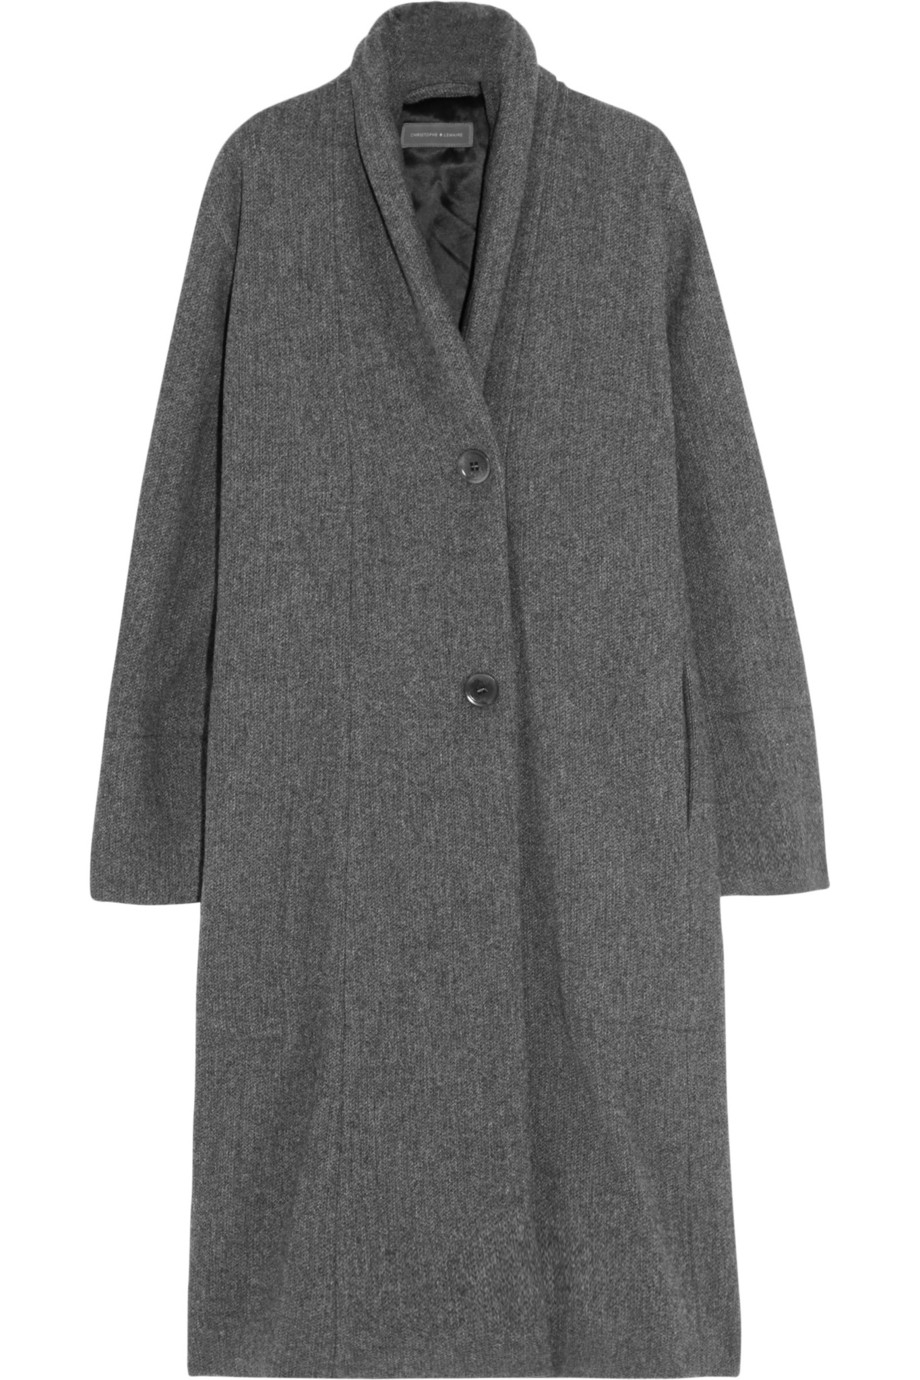 Lyst - Christophe lemaire Wool Coat in Gray